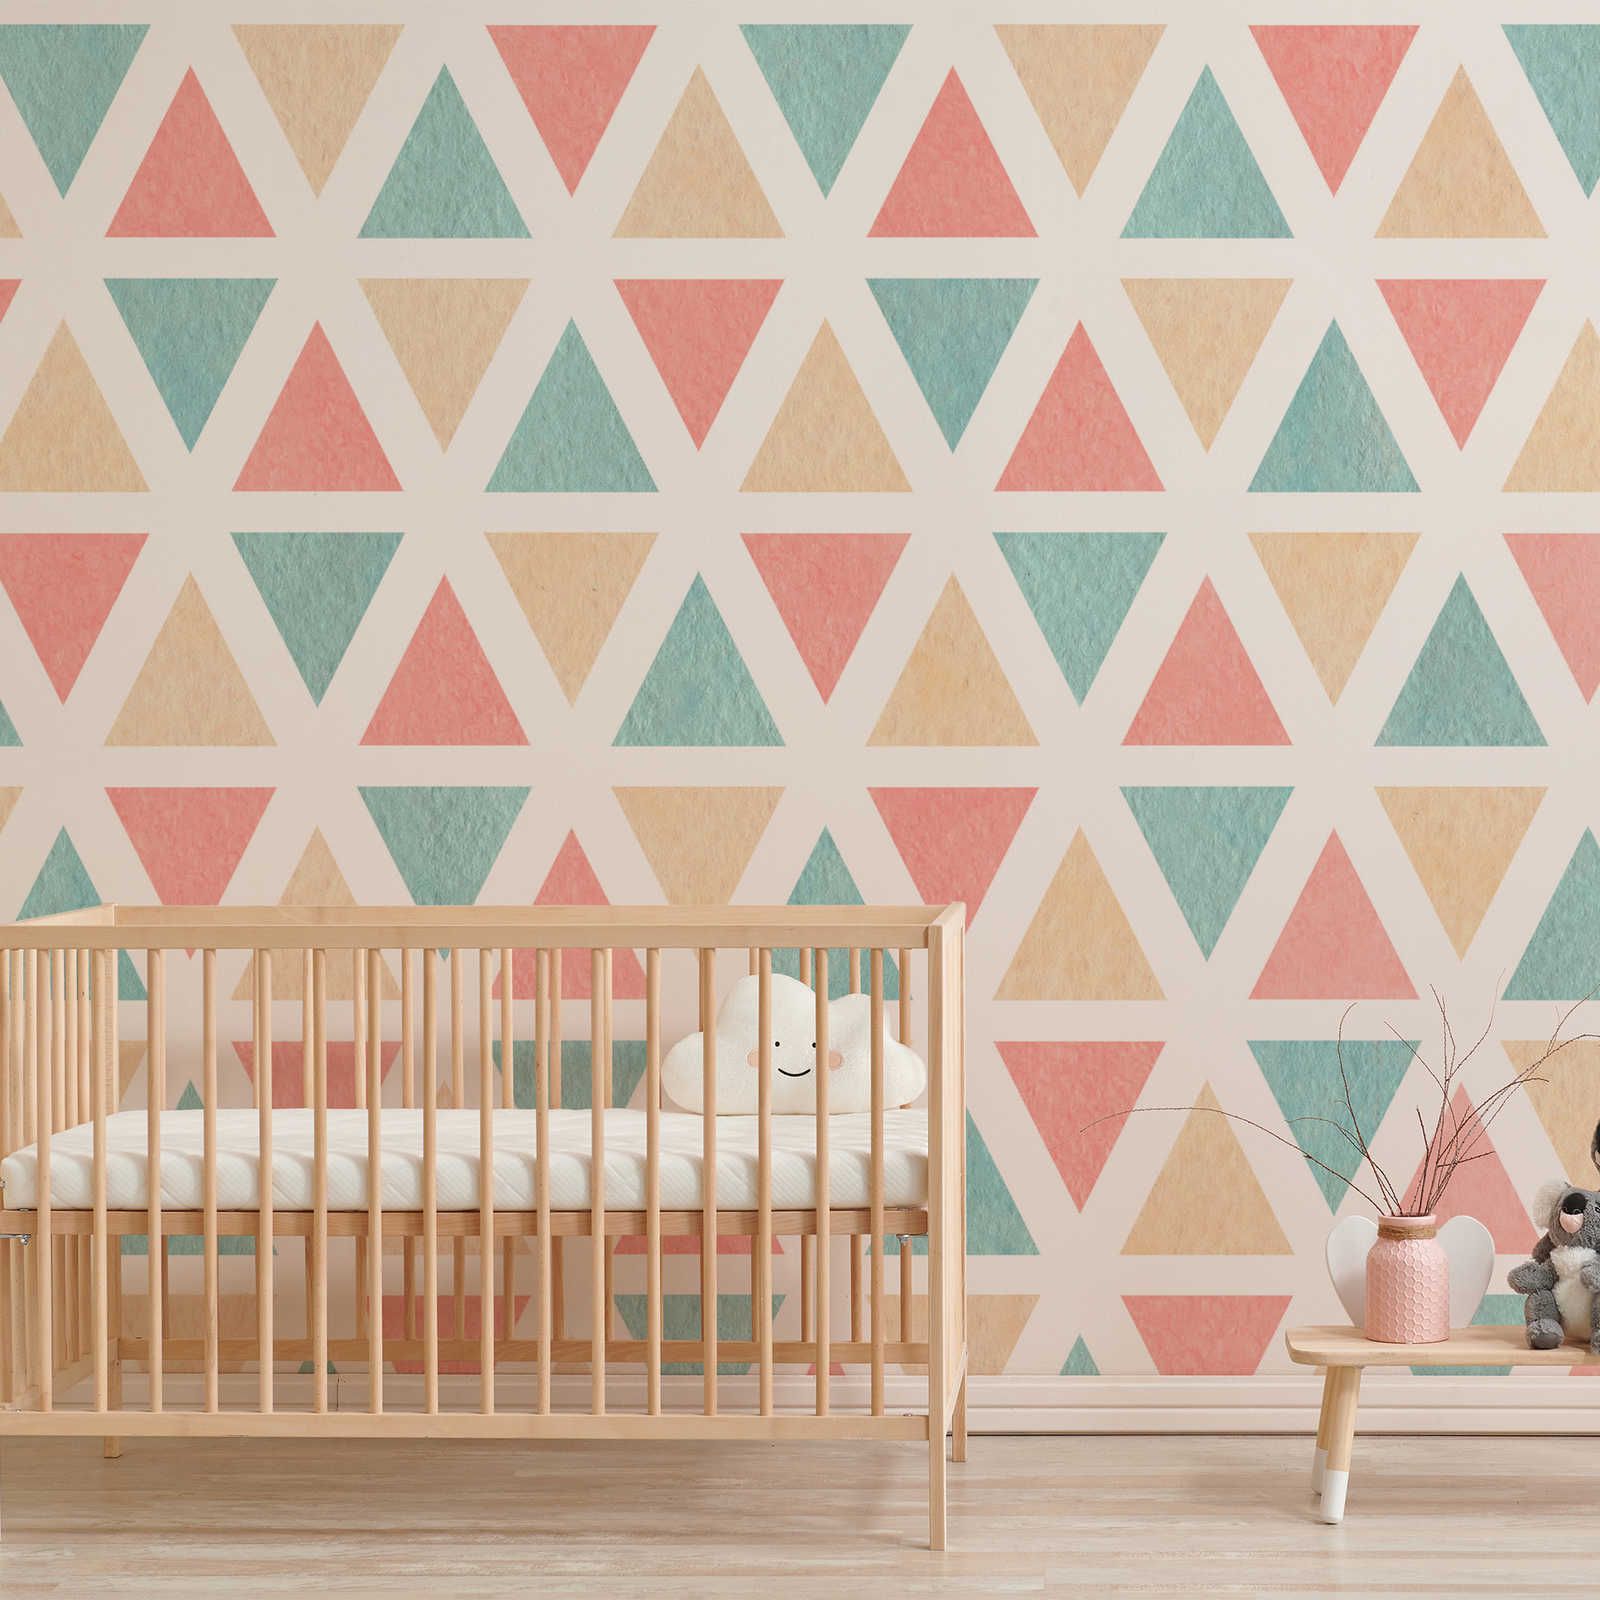 Photo wallpaper graphic pattern with colourful triangles - Smooth & slightly shiny non-woven
